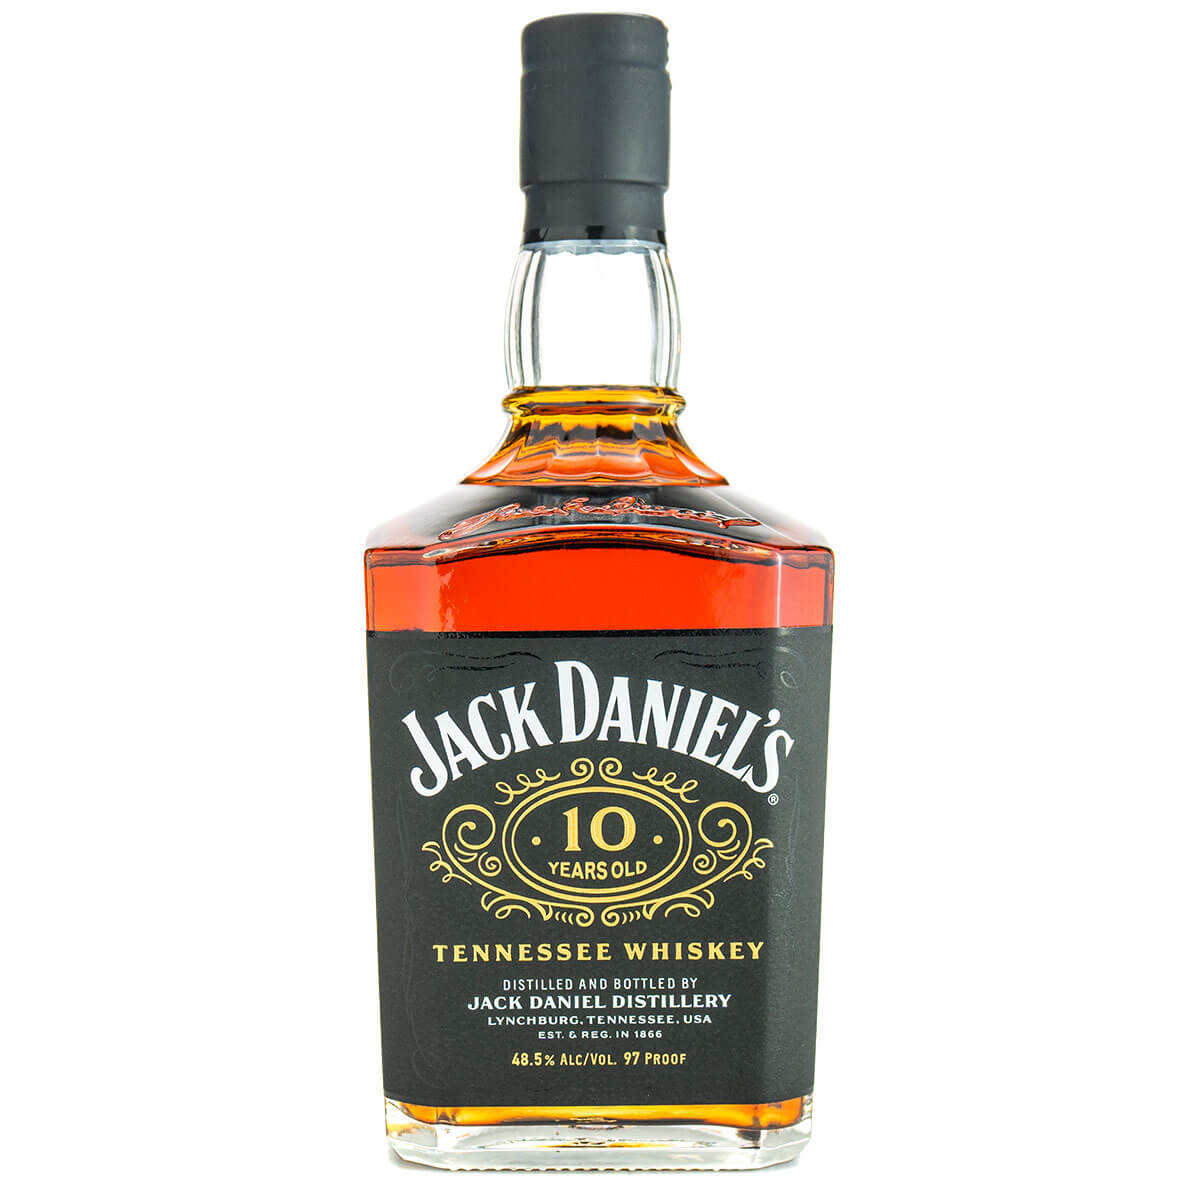 Jack Daniel’s 10-Year-Old Tennessee Whiskey bottle